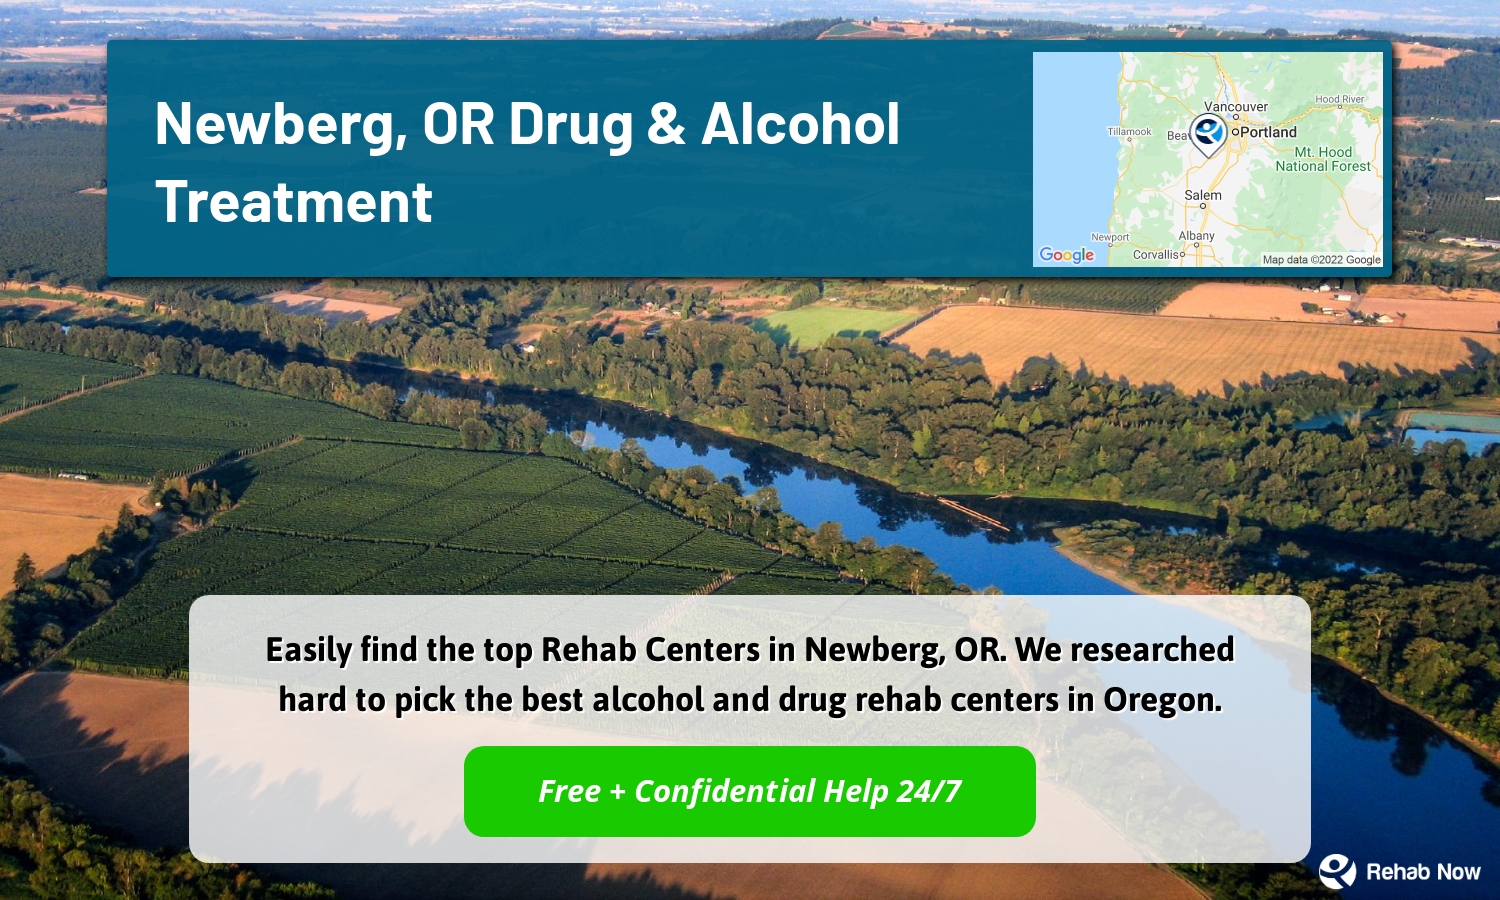 Easily find the top Rehab Centers in Newberg, OR. We researched hard to pick the best alcohol and drug rehab centers in Oregon.